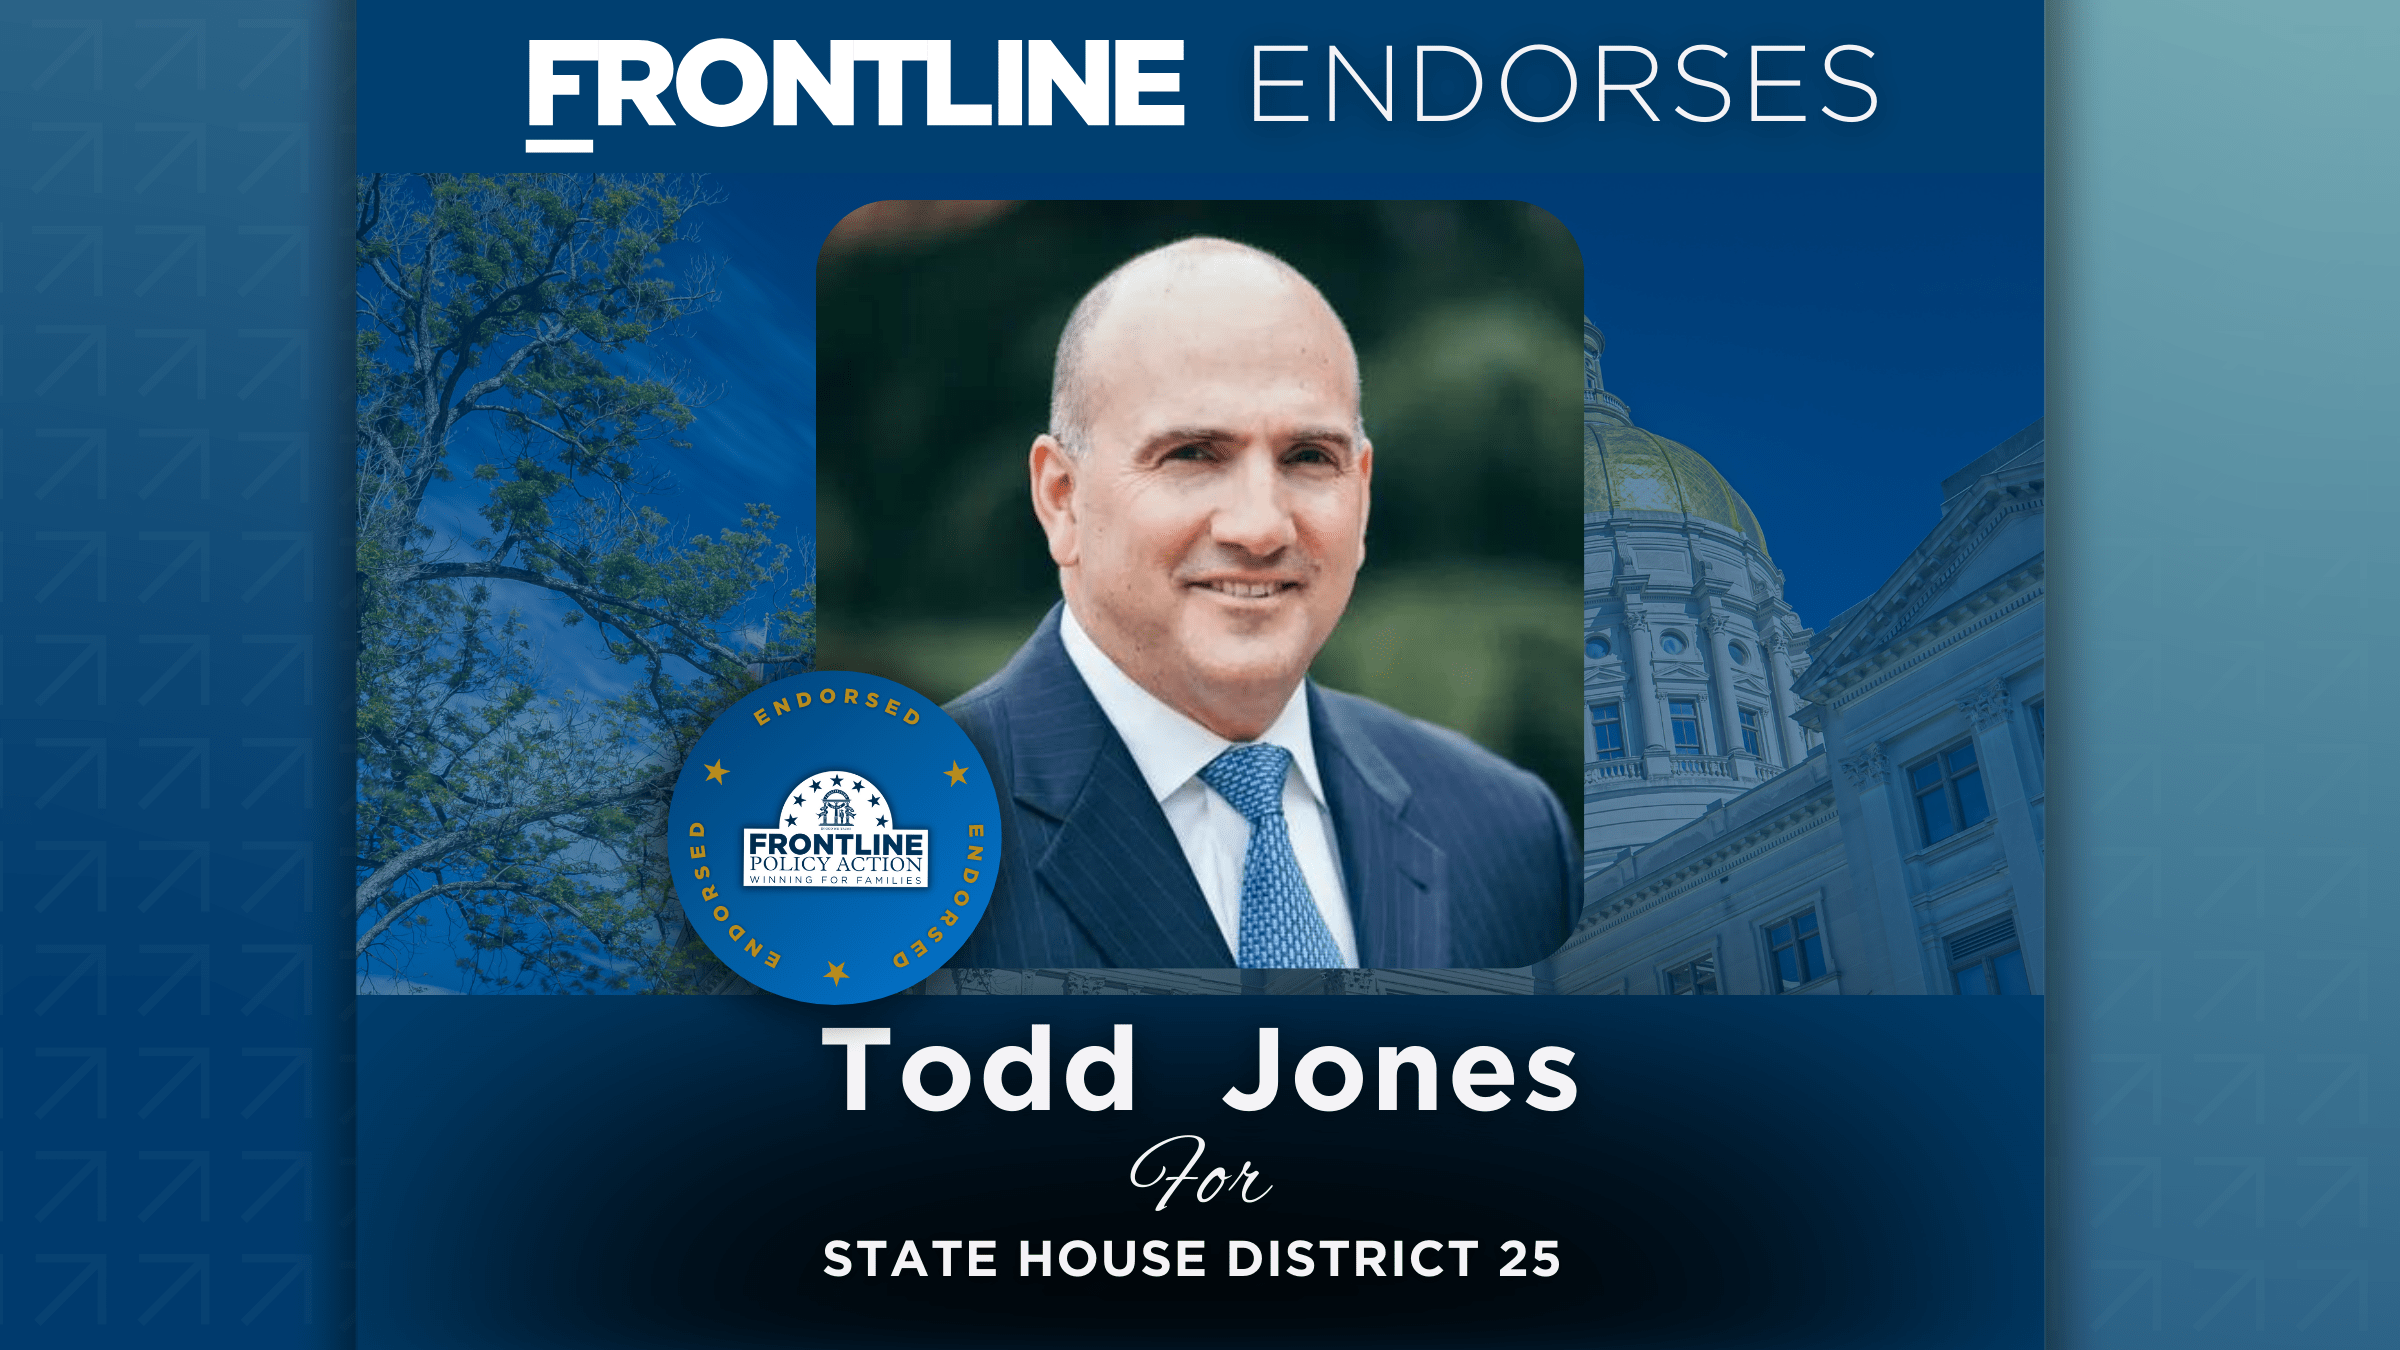 BREAKING: Frontline Endorses Todd Jones for State House District 25